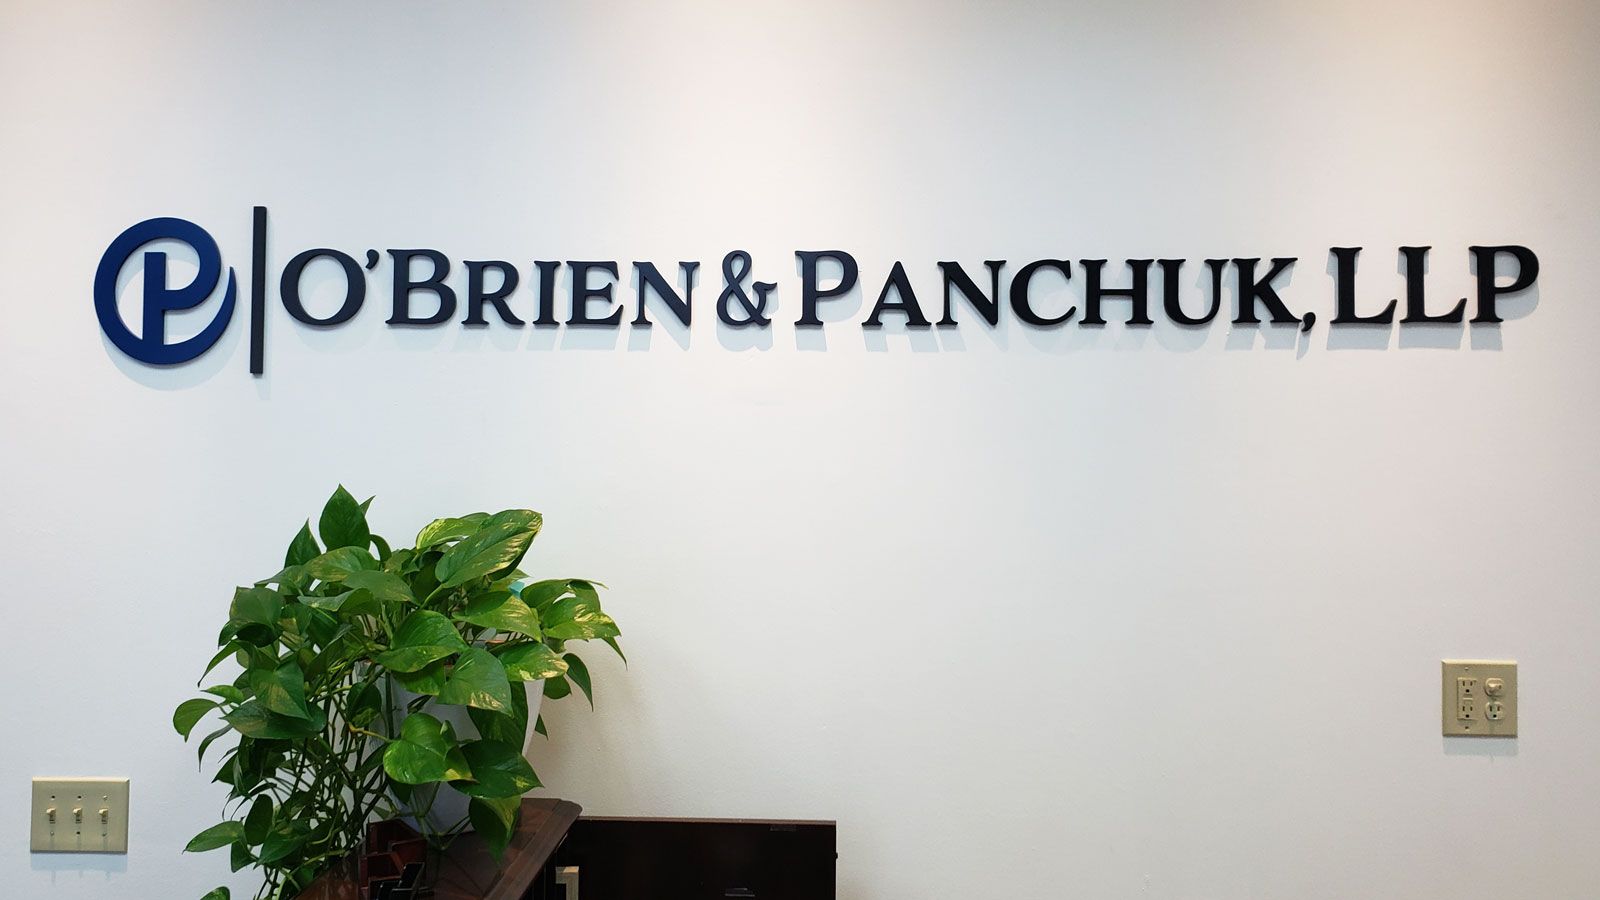 obrien and panchuk office 3d letters